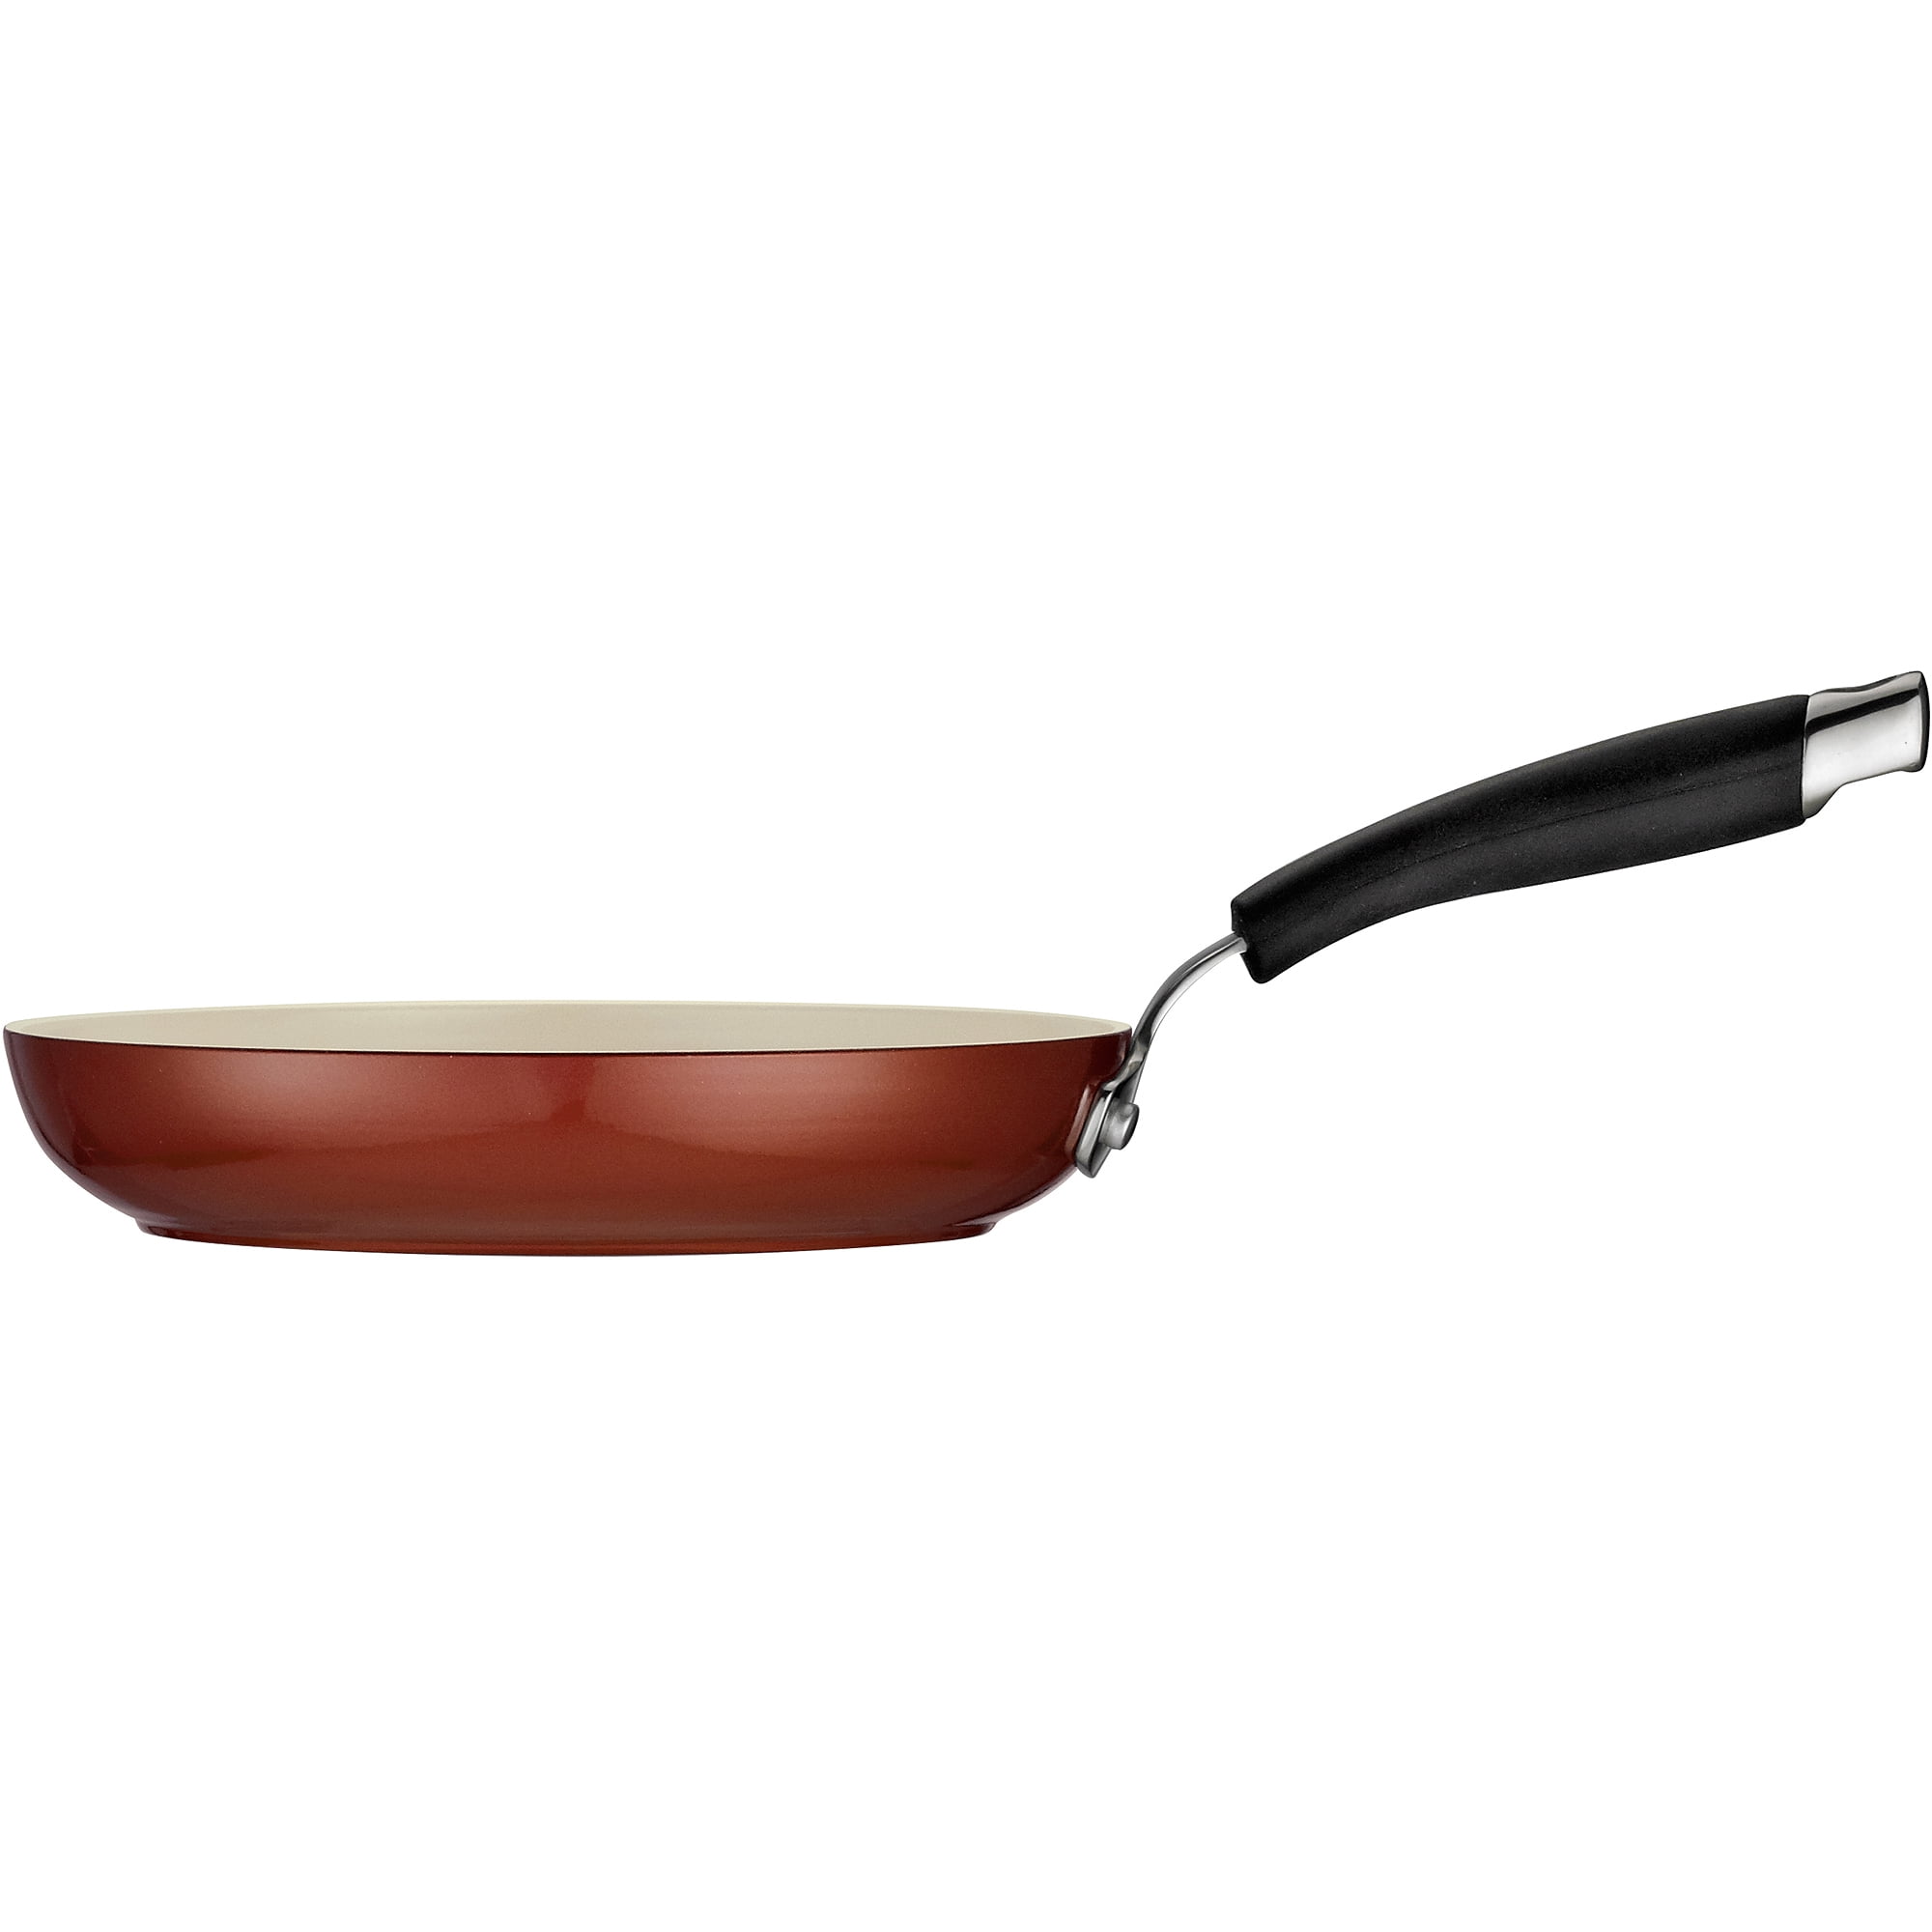 NEW Tramontina Nonstick Porcelain Enamel Pan Set, 8 Inches And 12